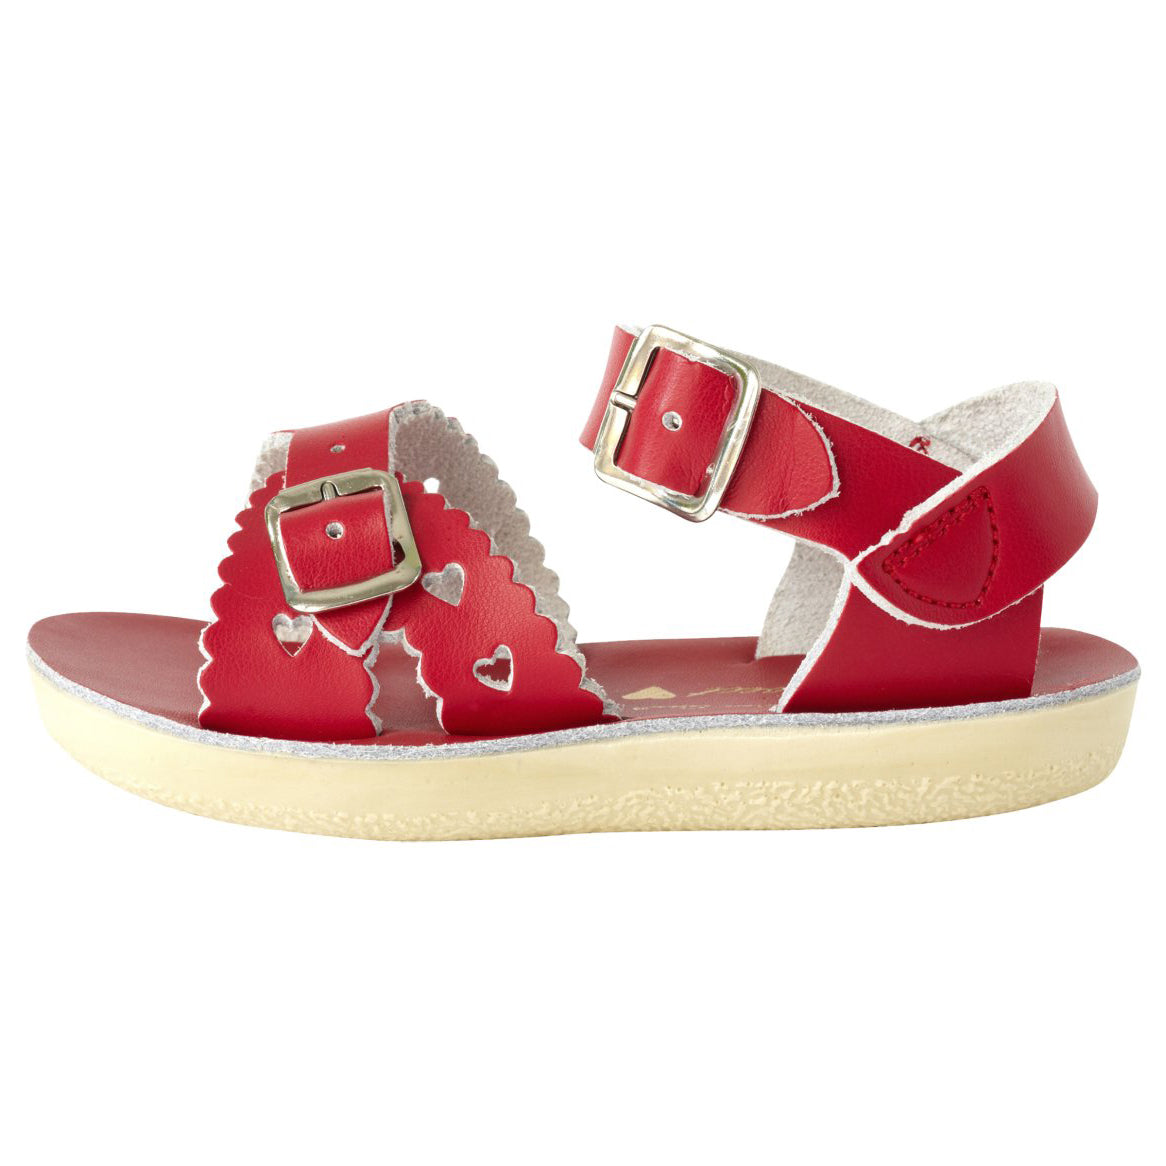 Boys & Girls Red "Sweetheart" Sandals